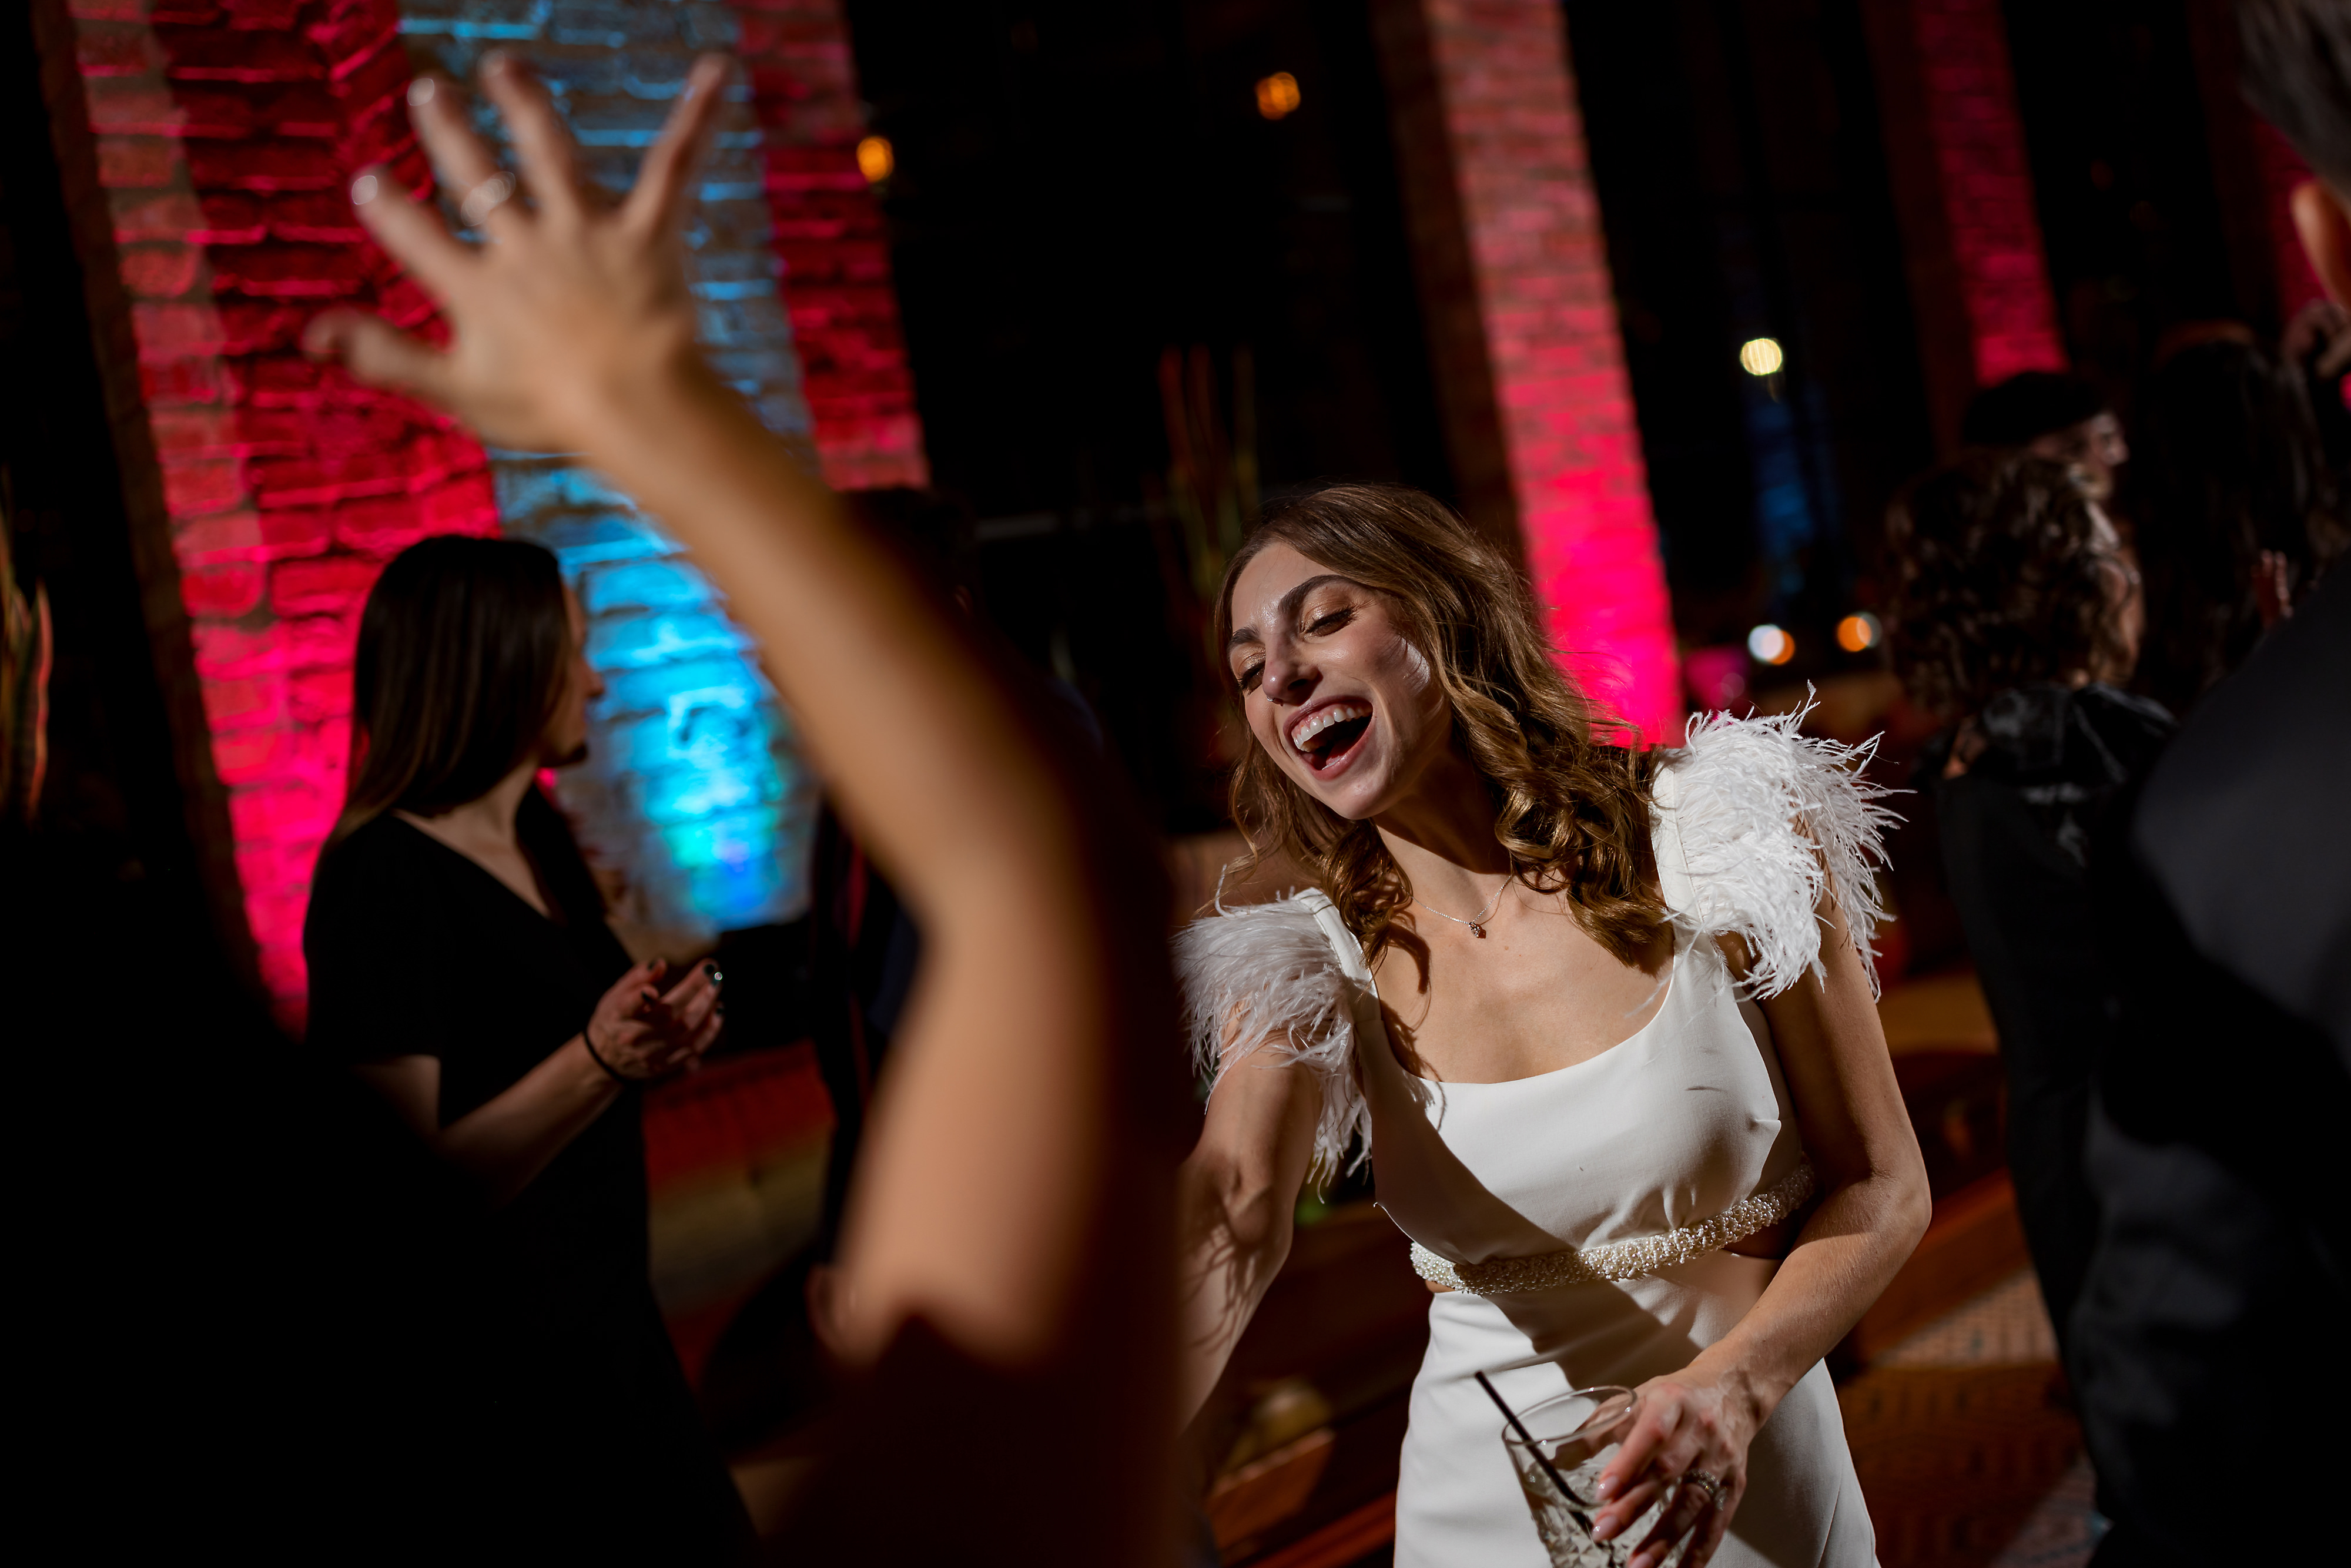 guests dance during wedding reception at Tabu Restaurant in Chicago's West Loop